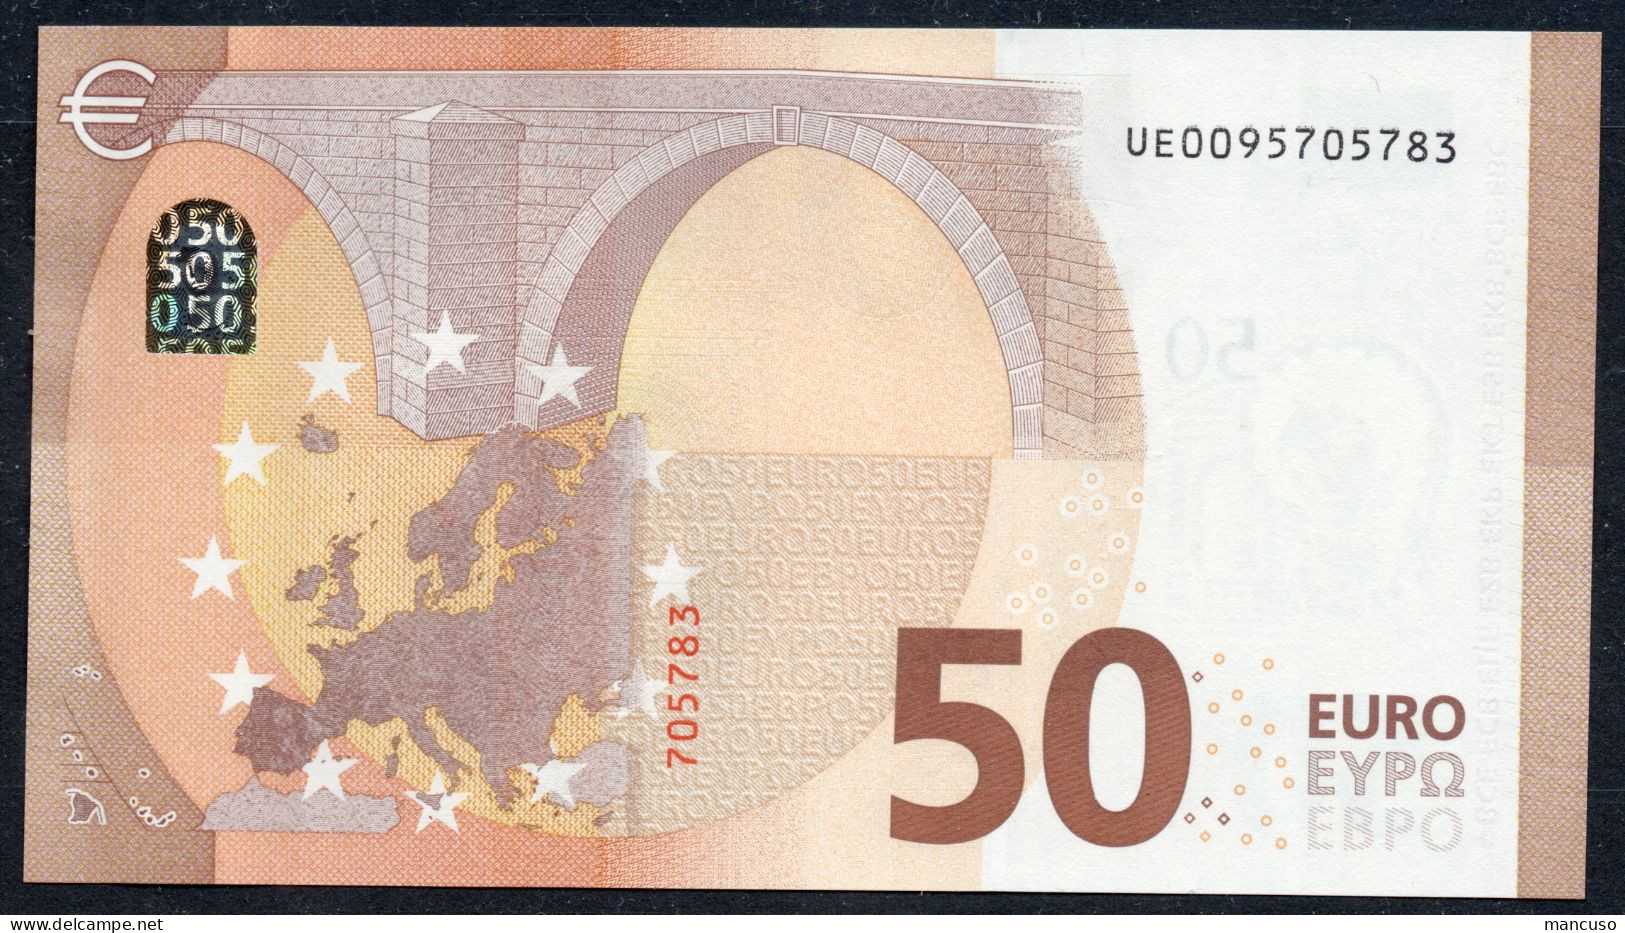 50 EURO FRANCE  UE U050A1 FIRST POSITION - Charge "09" - LAGARDE   UNC - 50 Euro